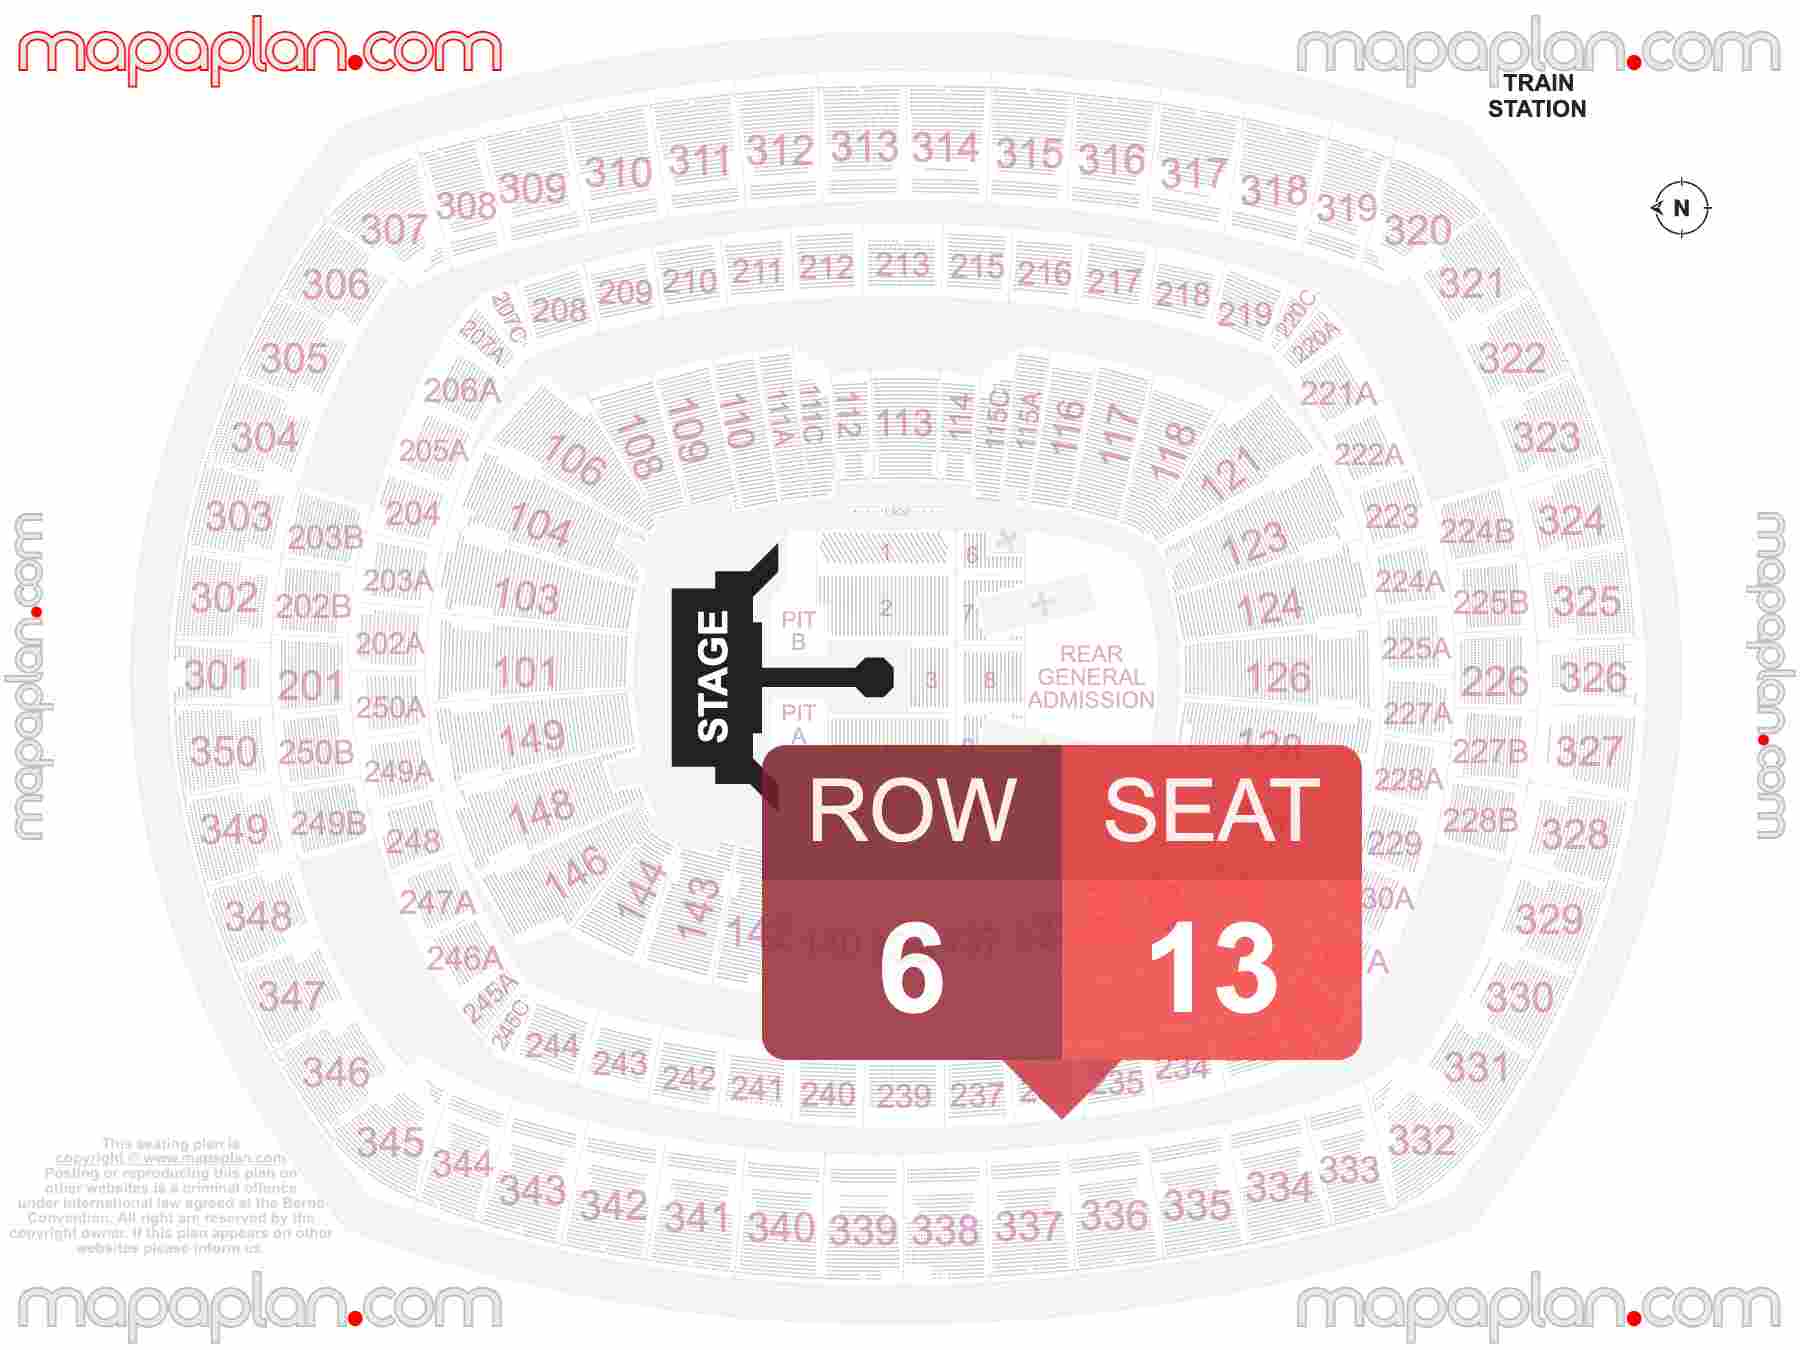 East Rutherford MetLife Stadium seating chart Concert with extended catwalk runway B-stage seating chart with exact section numbers showing best rows and seats selection 3d layout - Best interactive seat finder tool with precise detailed location data